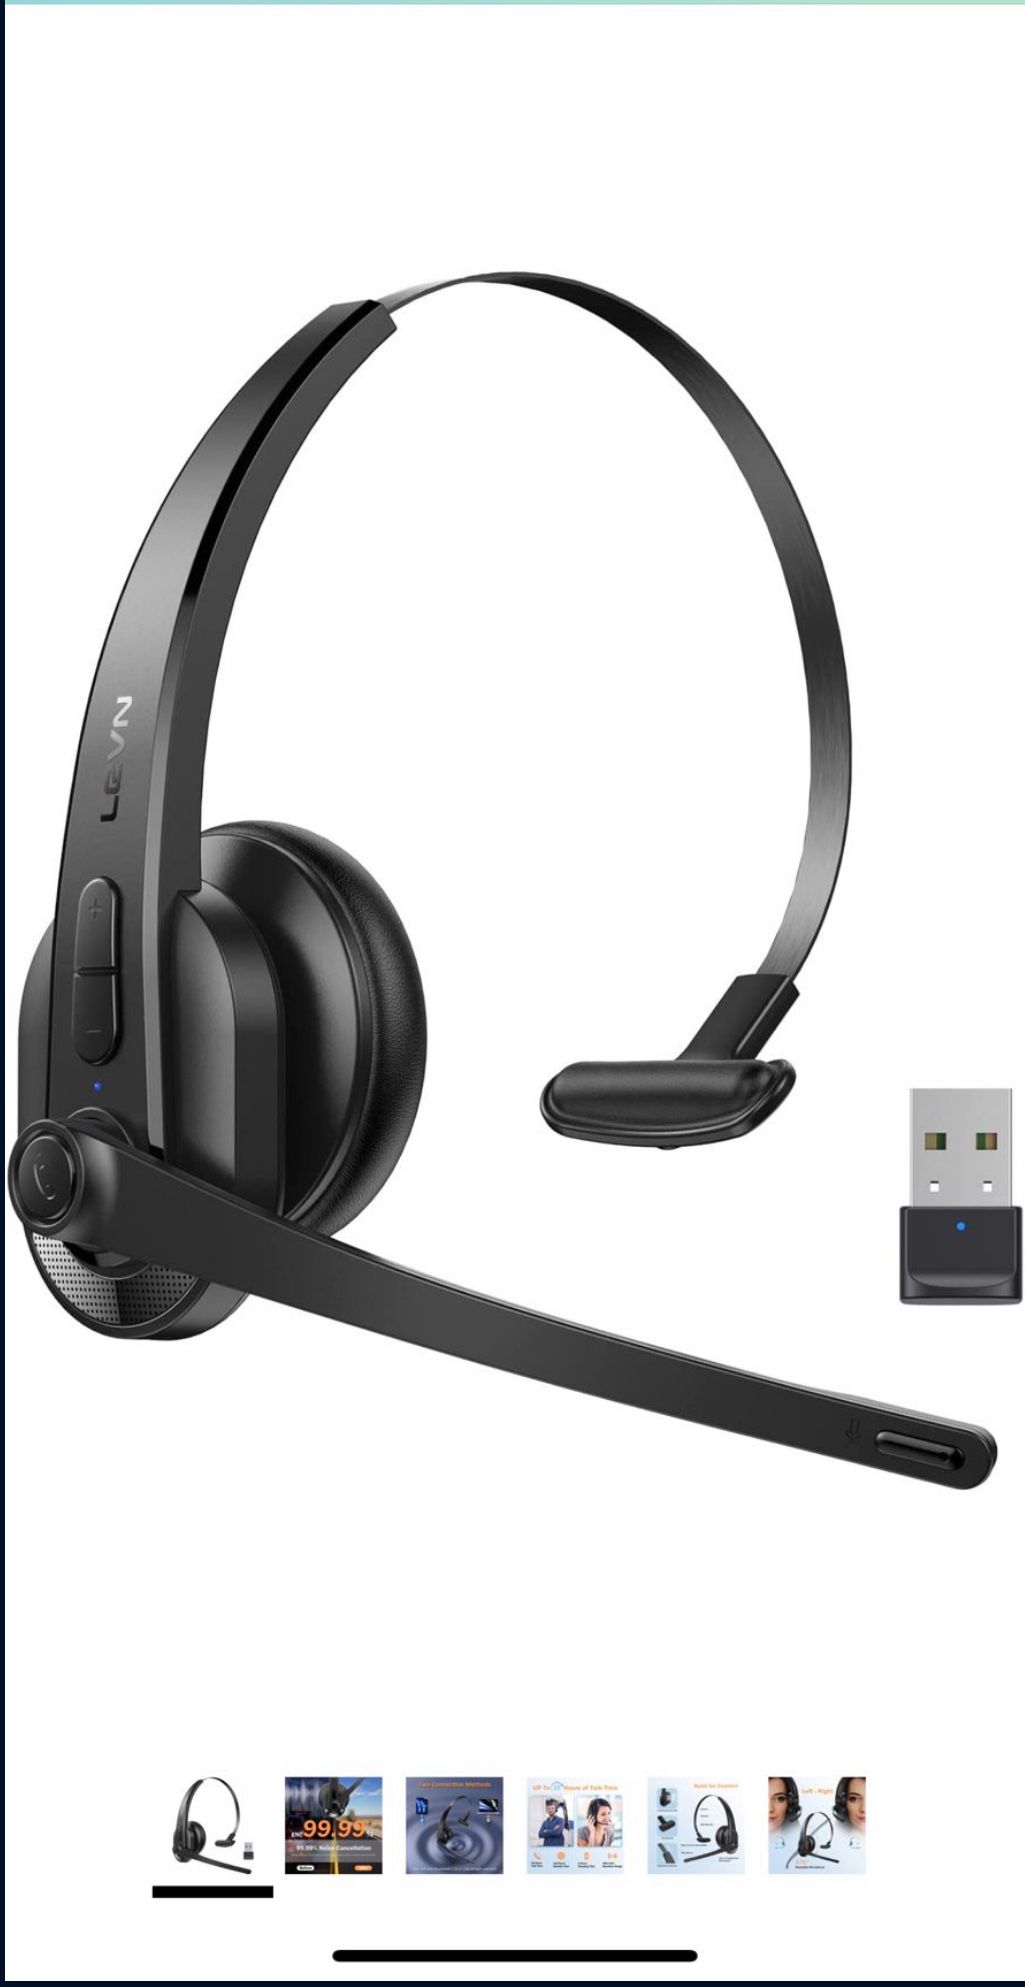 LEVN Wireless Headset, Bluetooth Headset with Microphone AI Noise Canceling & Mute Button, 35Hrs On-Ear Bluetooth Headphones with USB for Call Center/